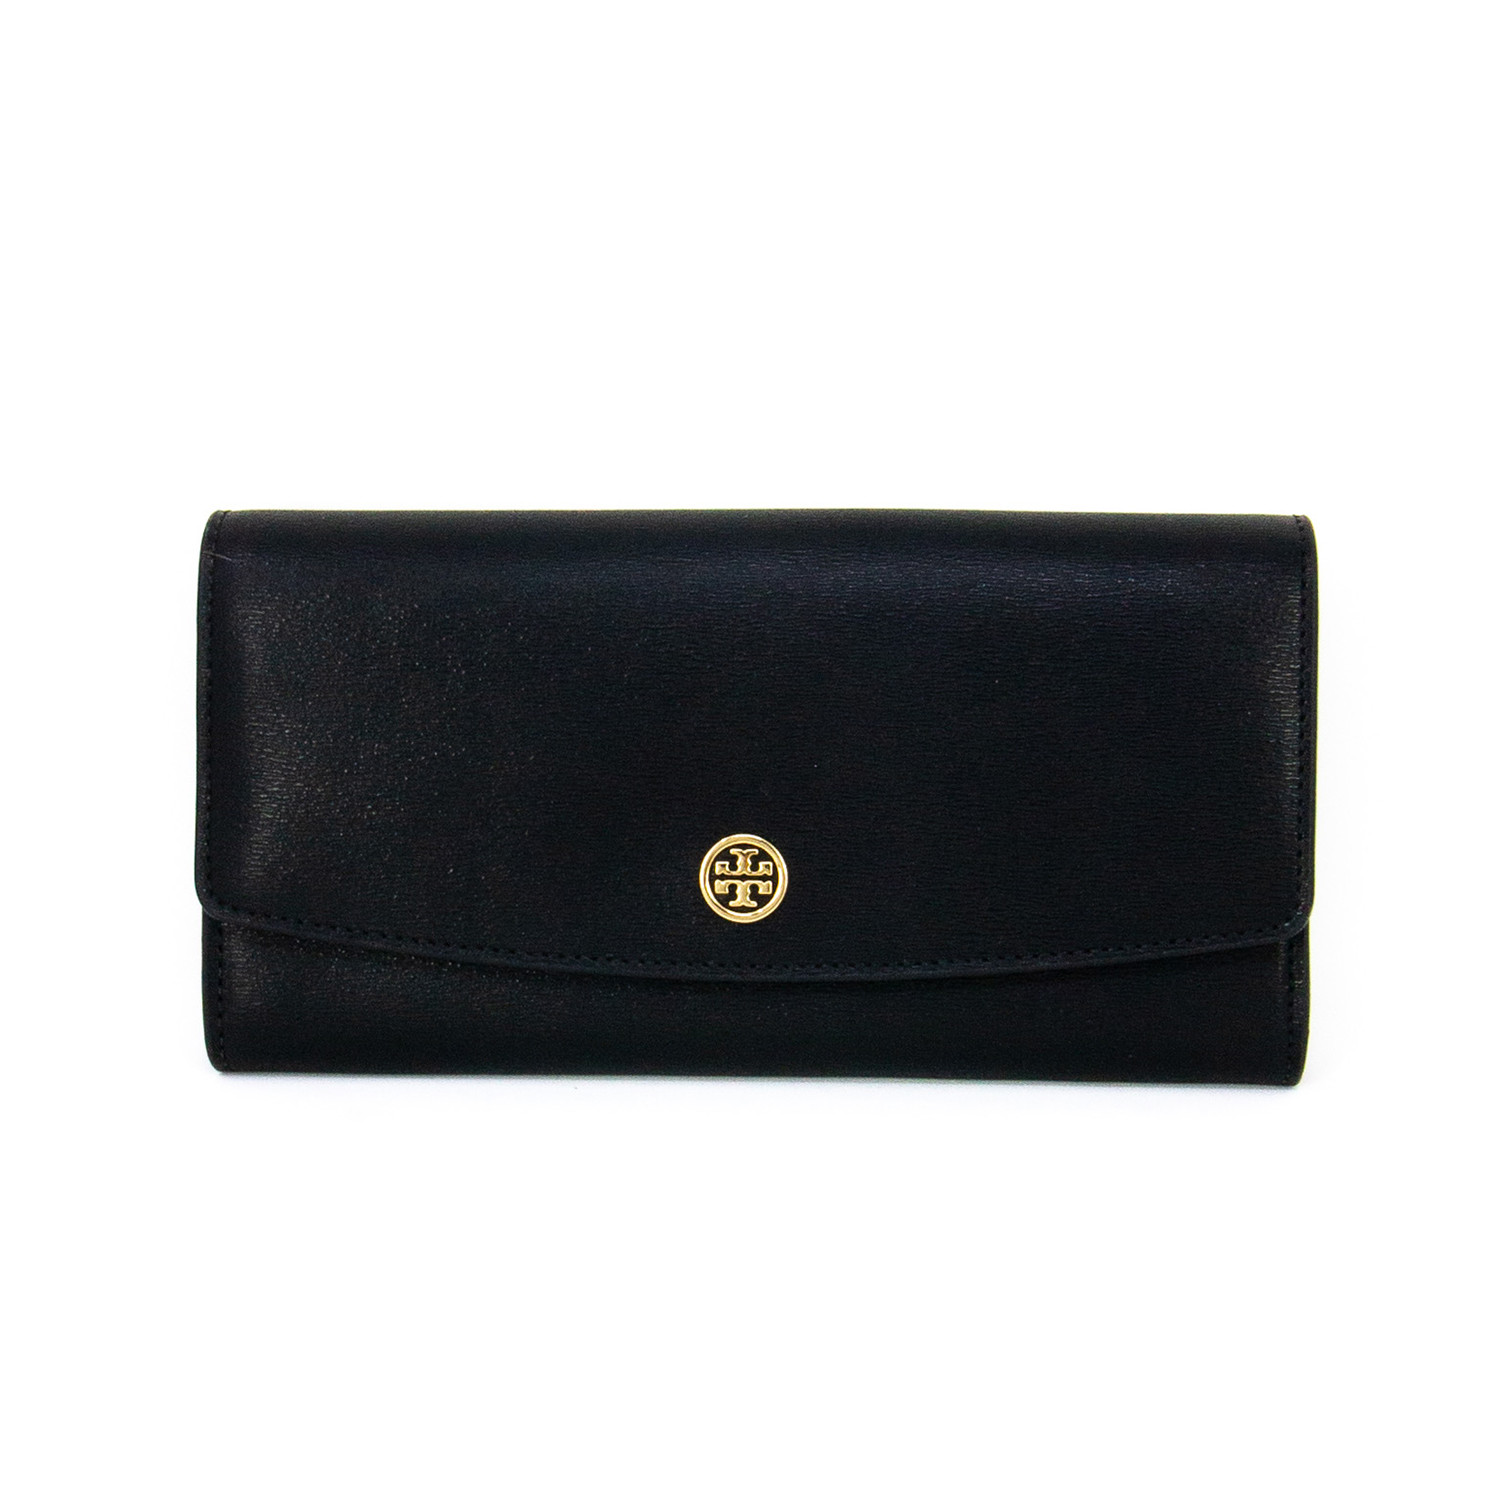 Wallet // Black - Tory Burch - Touch of Modern